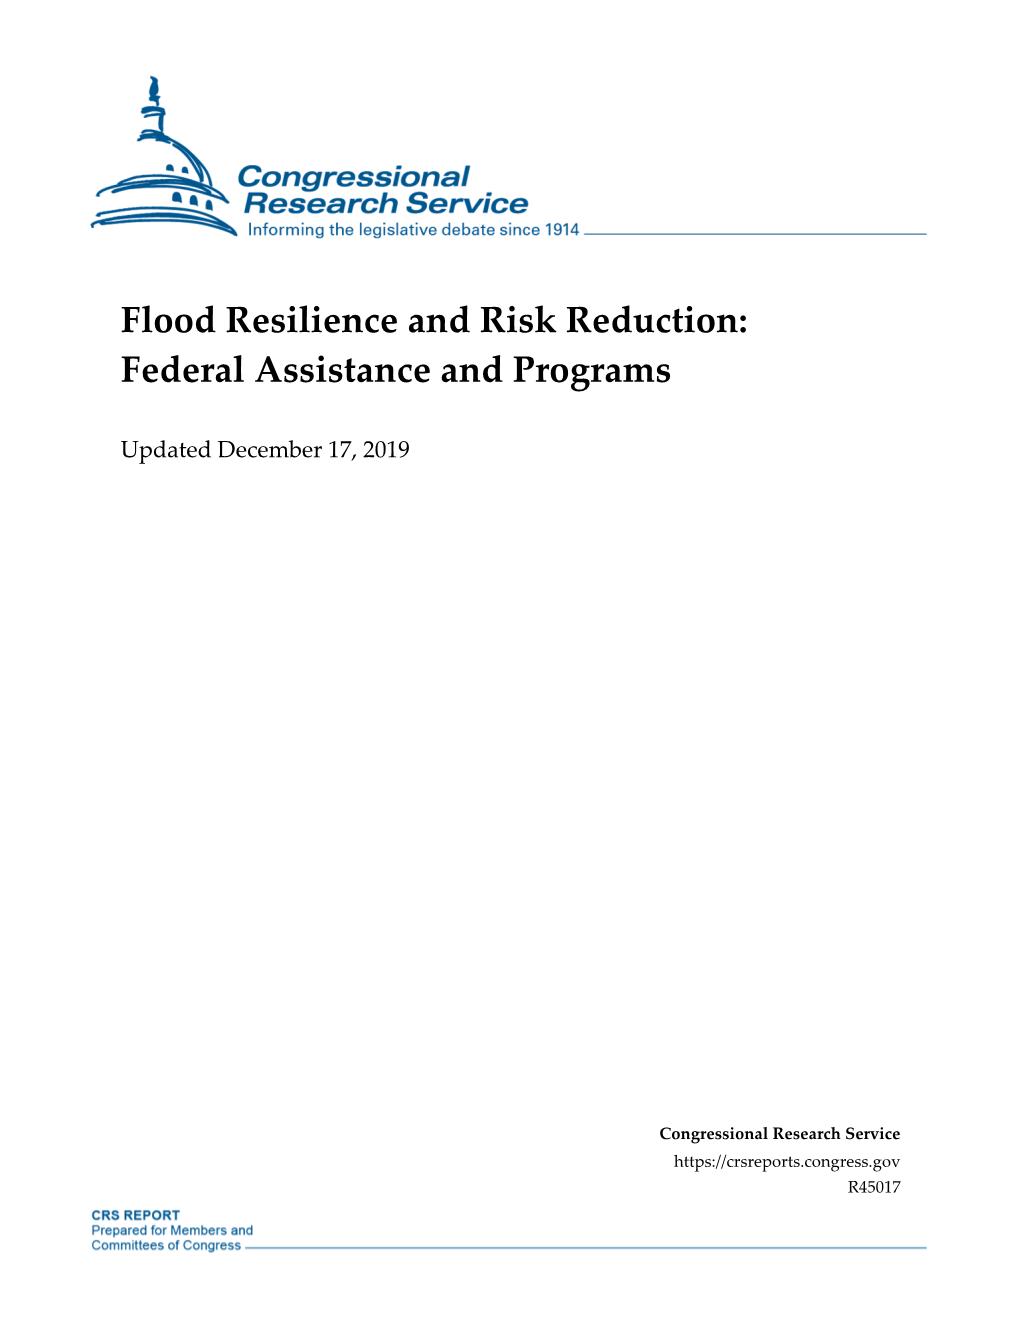 Flood Resilience and Risk Reduction: Federal Assistance and Programs